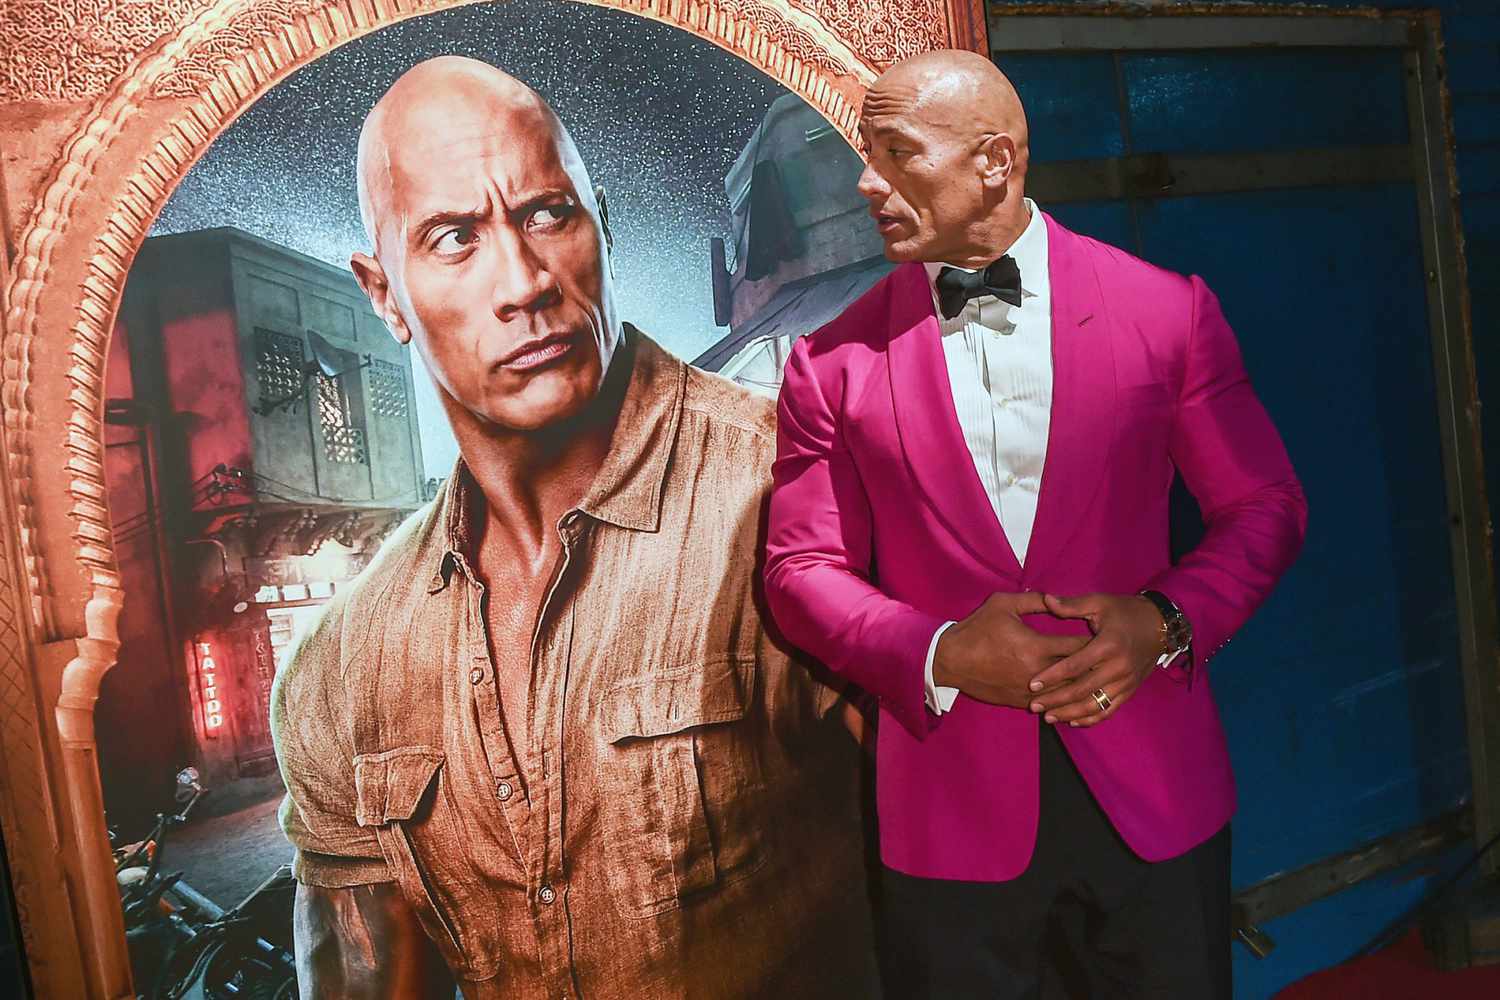 Dwayne Johnson at the UK Premiere of JUMANJI: THE NEXT LEVEL at Odeon IMAX Waterloo on December 05, 2019 in London, England